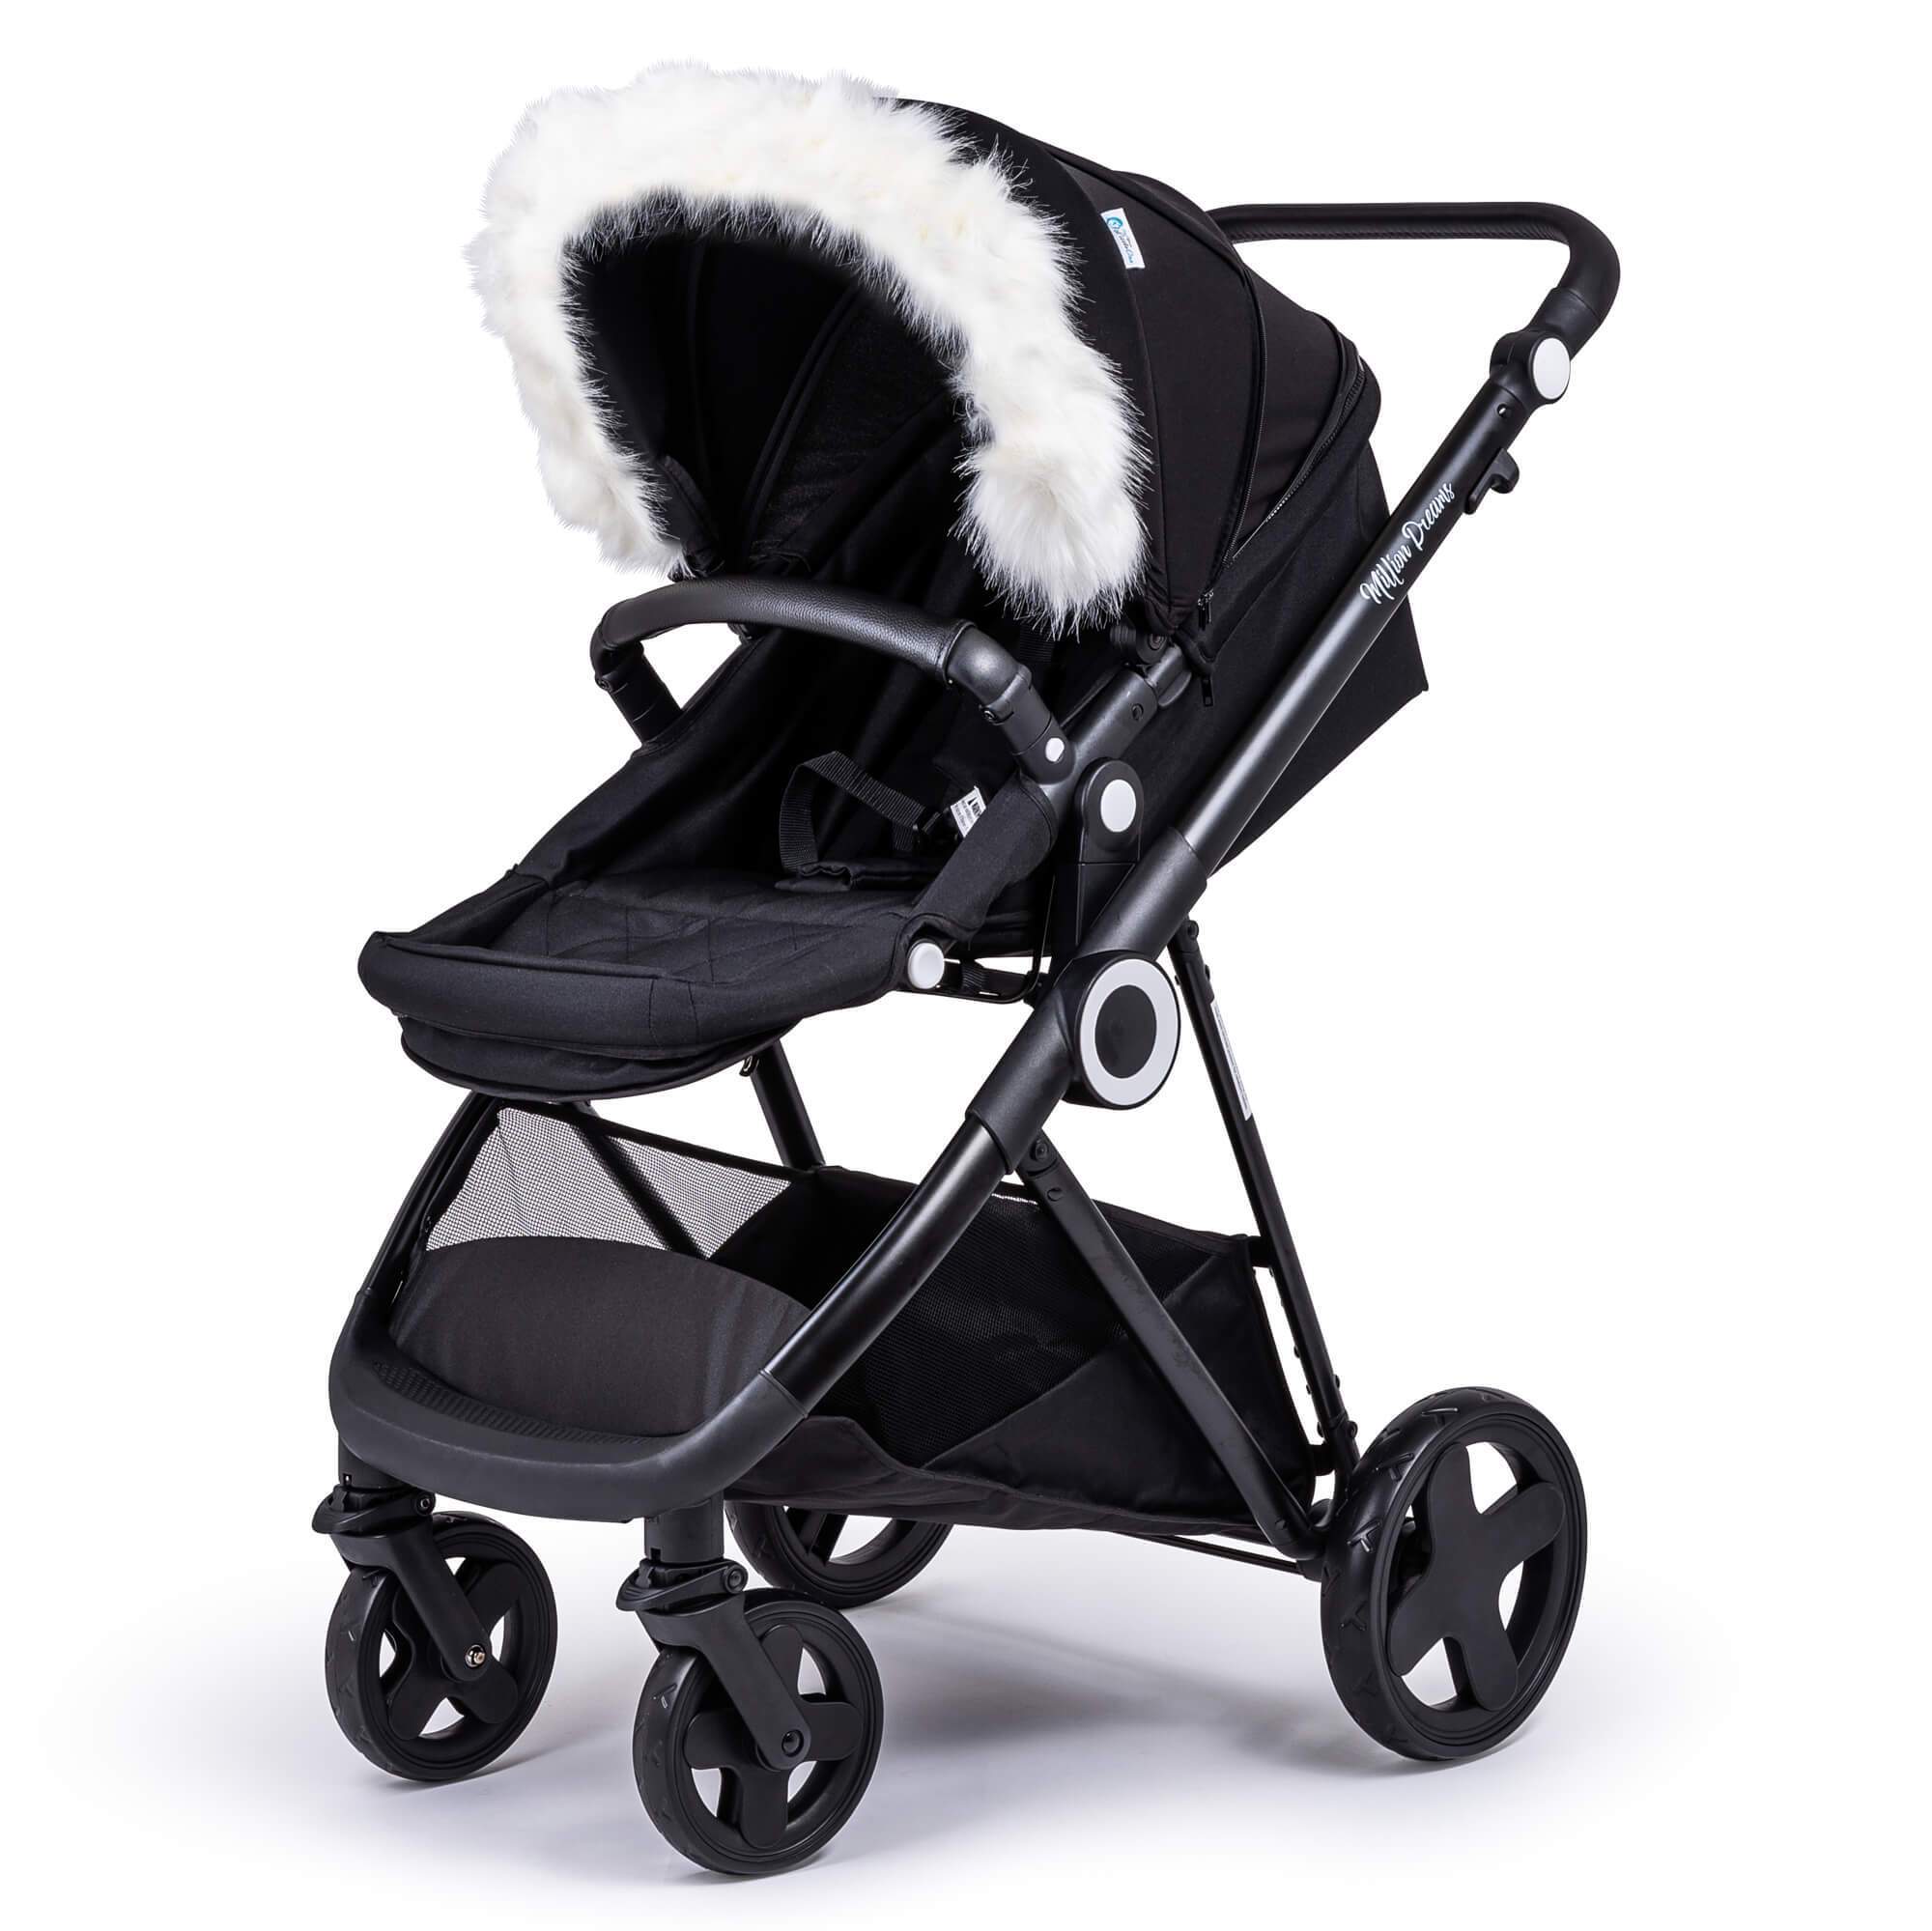 Pram Fur Hood Trim Attachment for Pushchair Compatible with Kiddicare - White / Fits All Models | For Your Little One